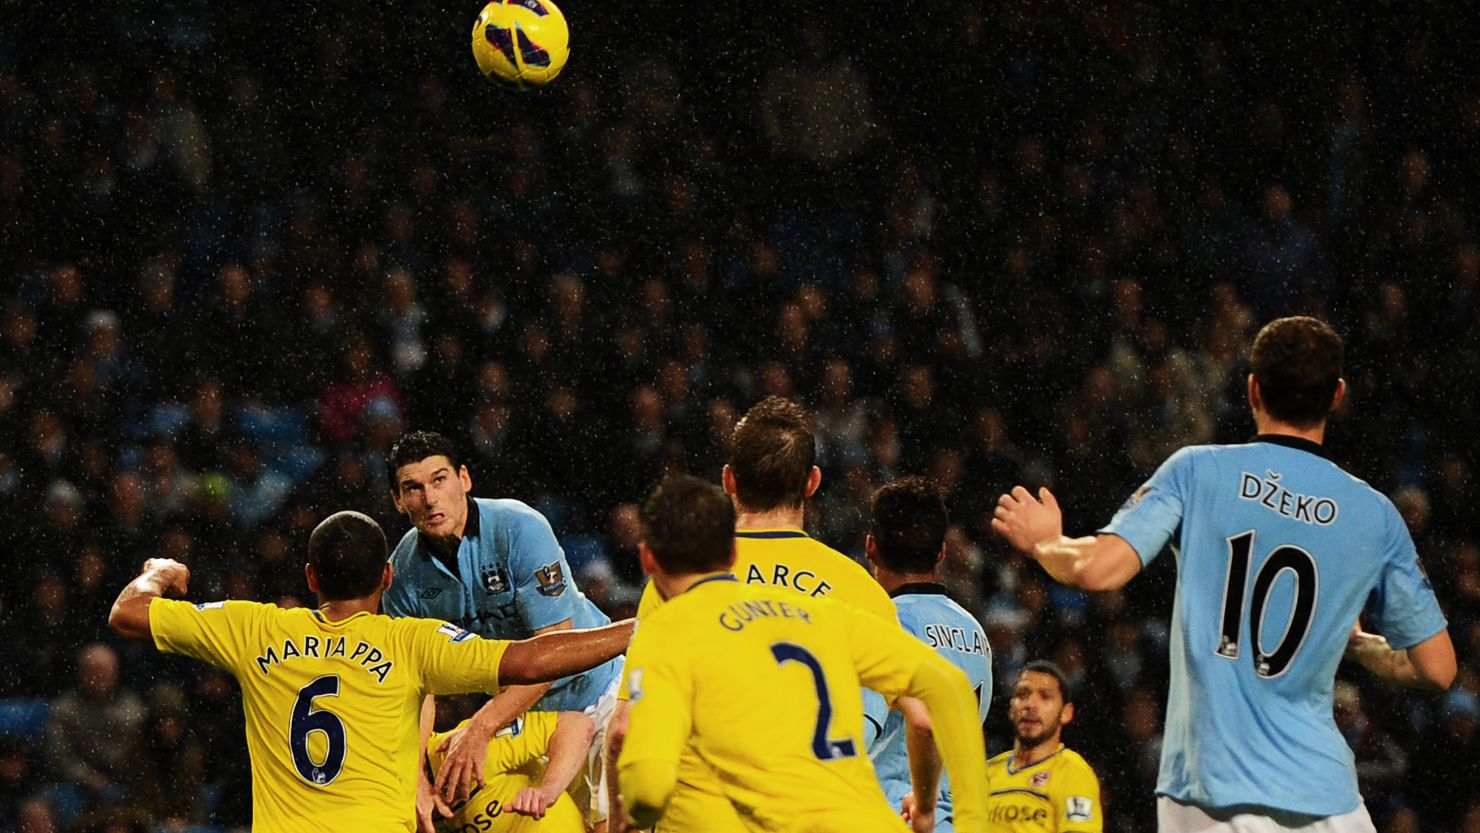 Gareth Barry scores the winner against Reading at a rainy Etihad Stadium to close gap on Manchester United to three points. 